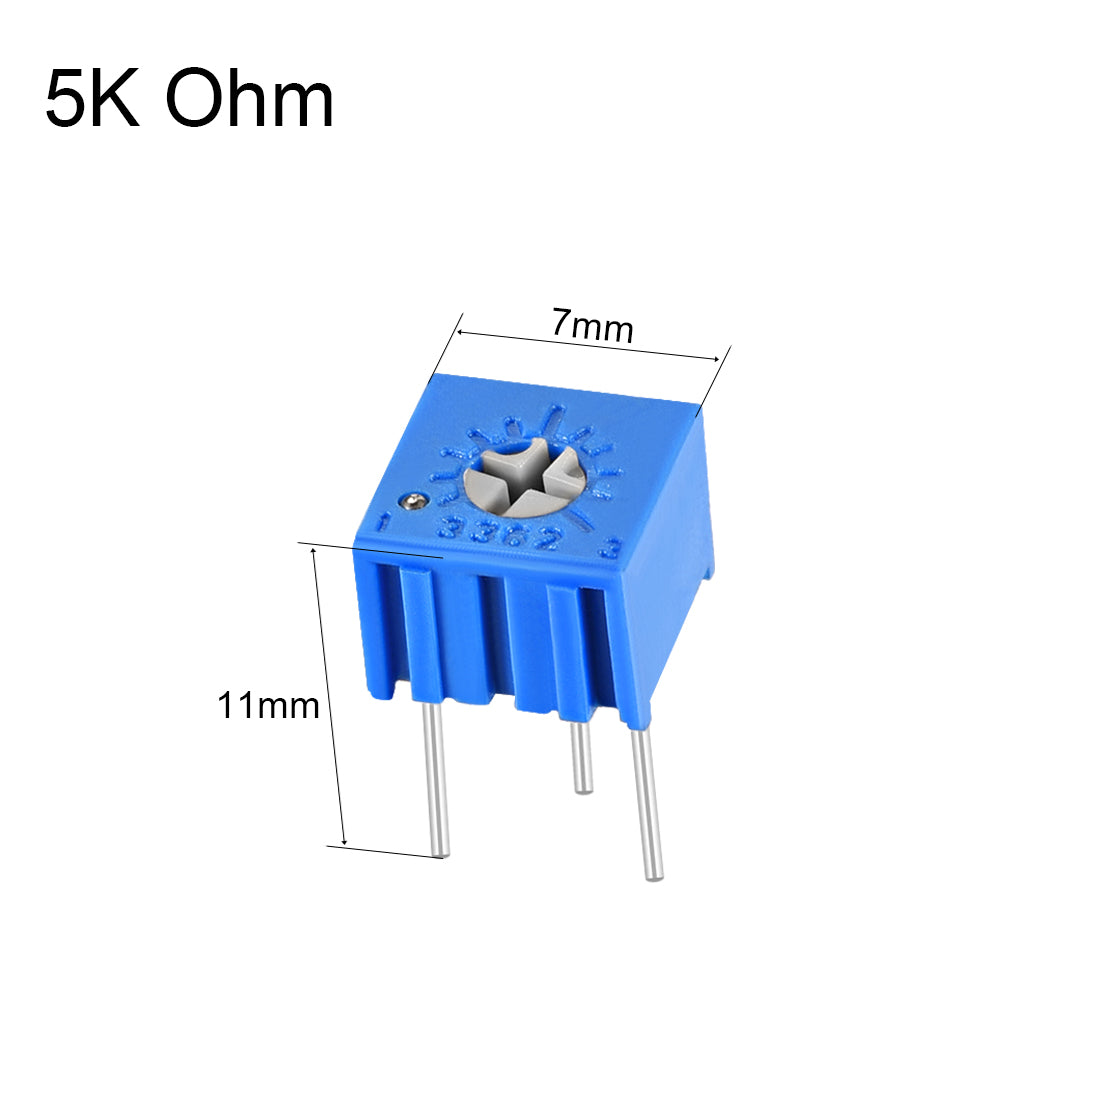 uxcell Uxcell 3362 Trimmer Potentiometer 5K Ohm Top Adjustment Horizontal Variable Resistors 10Pcs